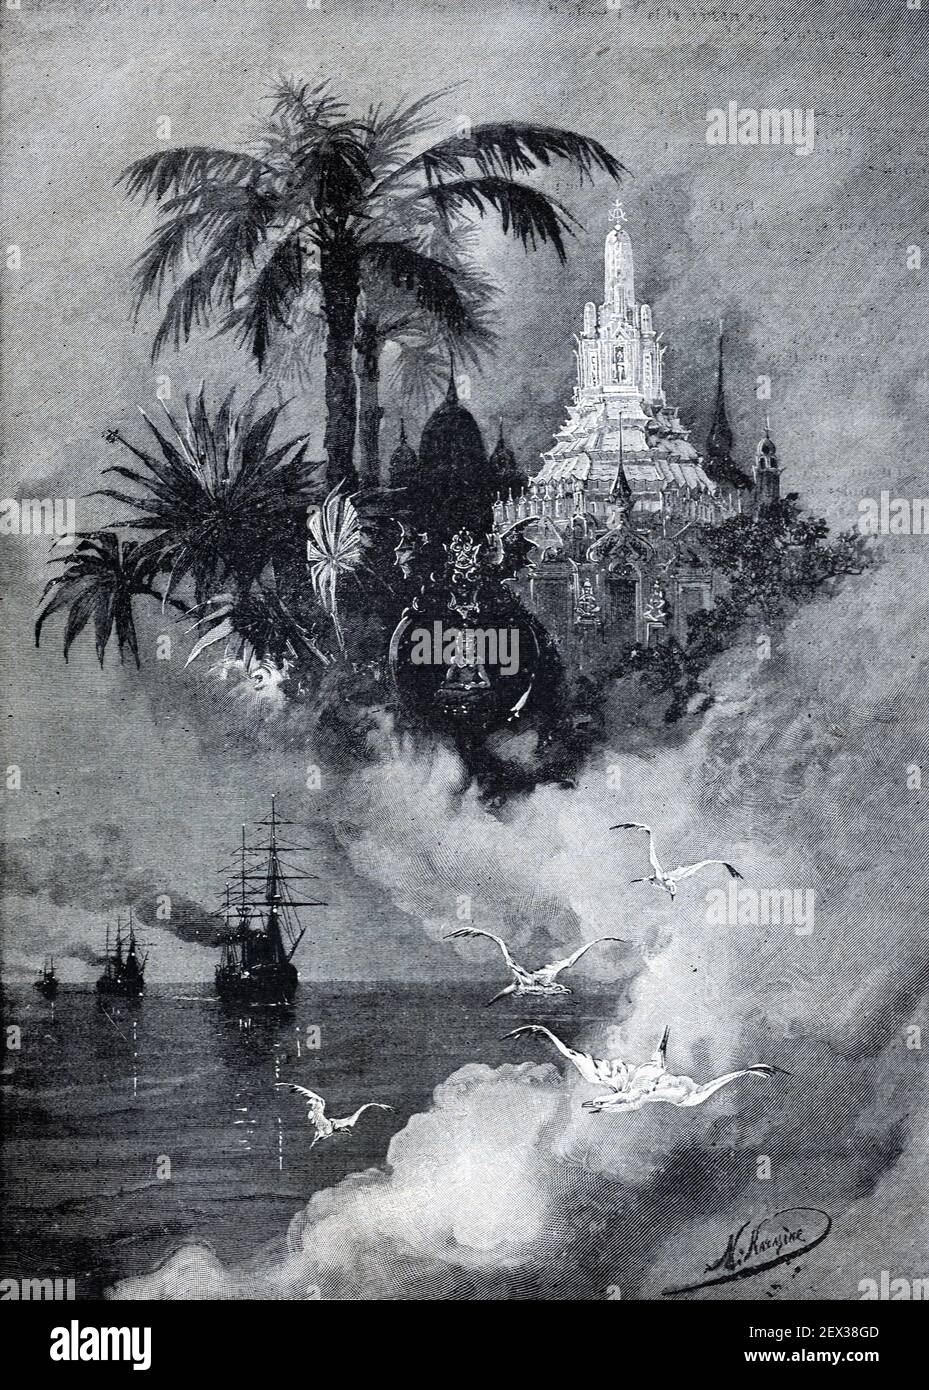 Grand Tour or Travels of Russian Emperor and Tsar Nicolas II to Asia and the Far East including Siam or Thailand 1896 Vintage Illustration or Old Engraving Stock Photo